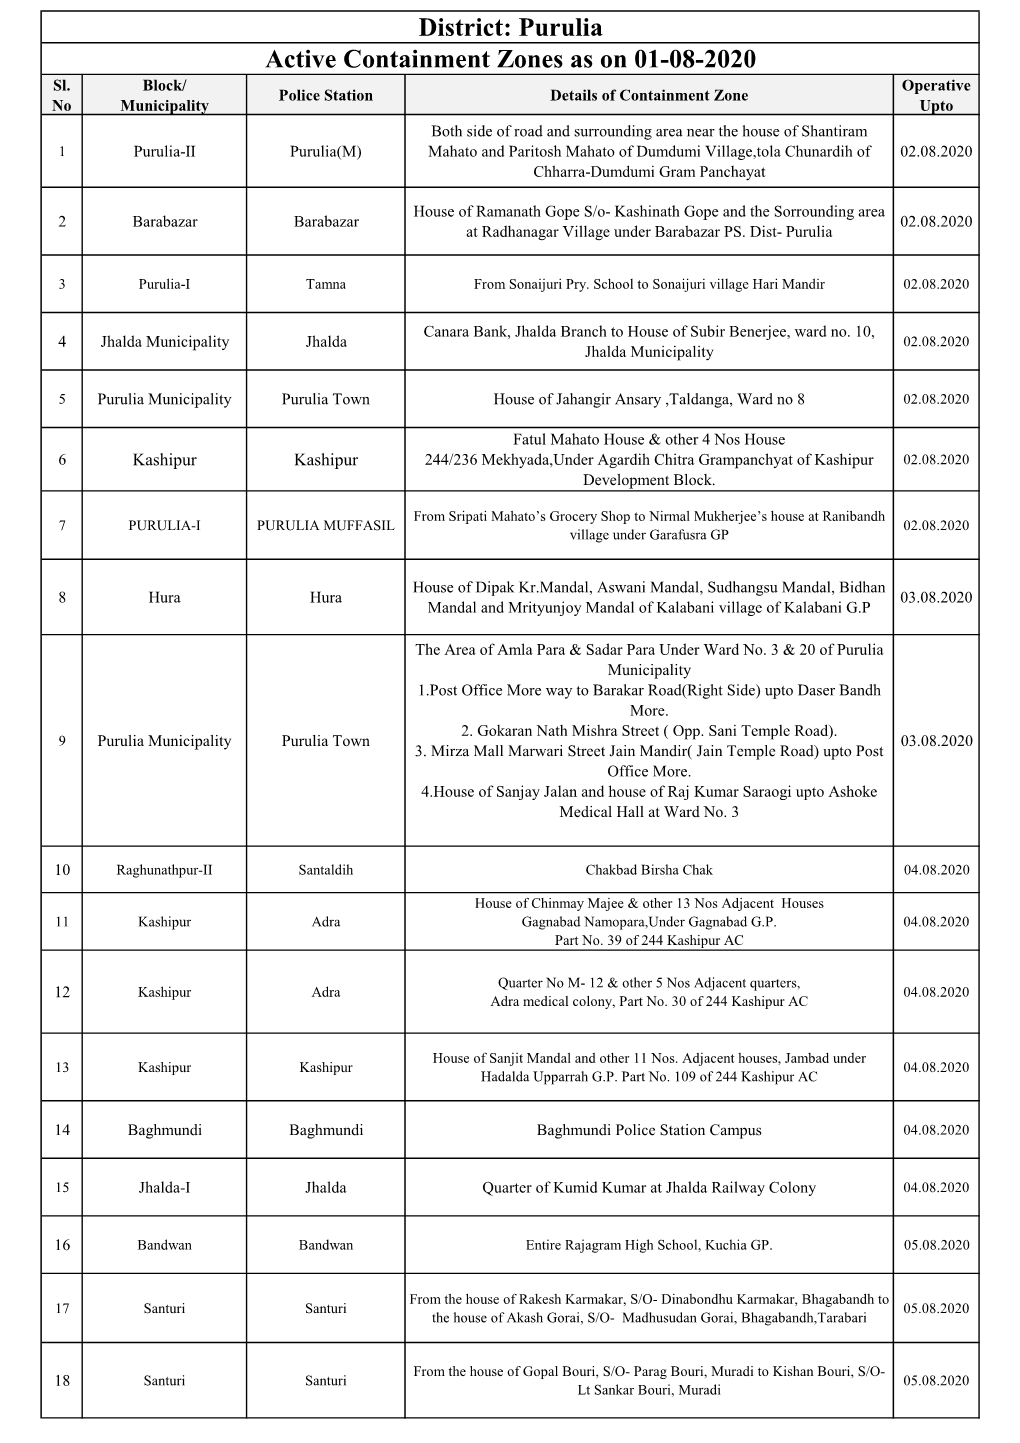 Active Containment Zones As on 01-08-2020 District: Purulia